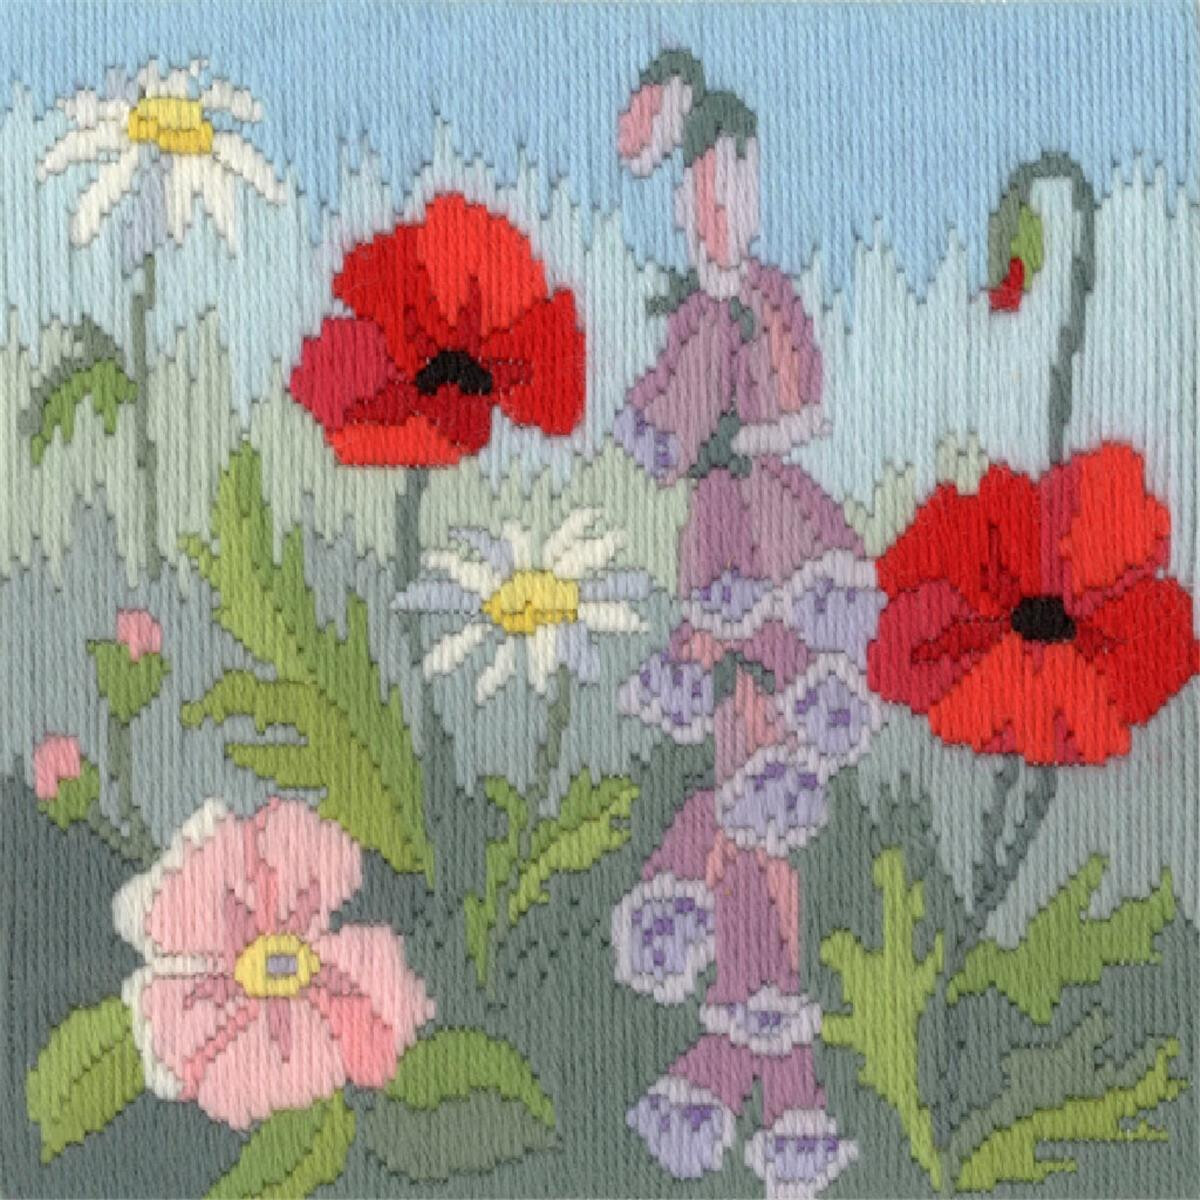 A vibrant needlepoint artwork or embroidery pack from...